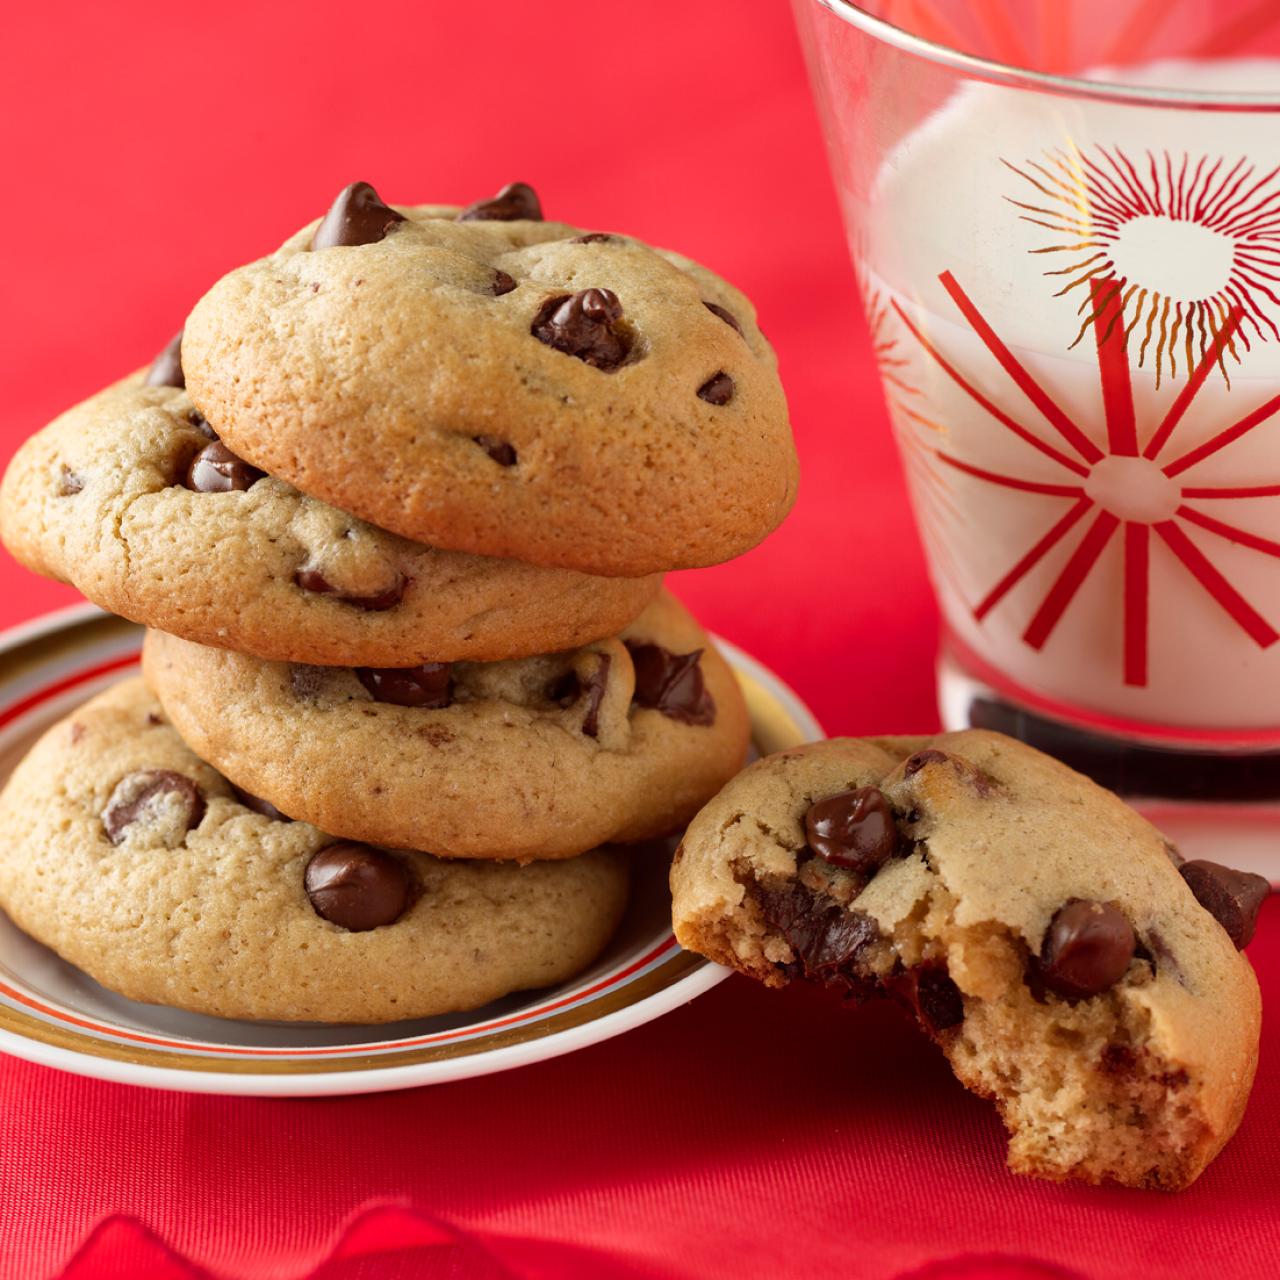 Best Chocolate Chip Cookies Recipe (with Video)